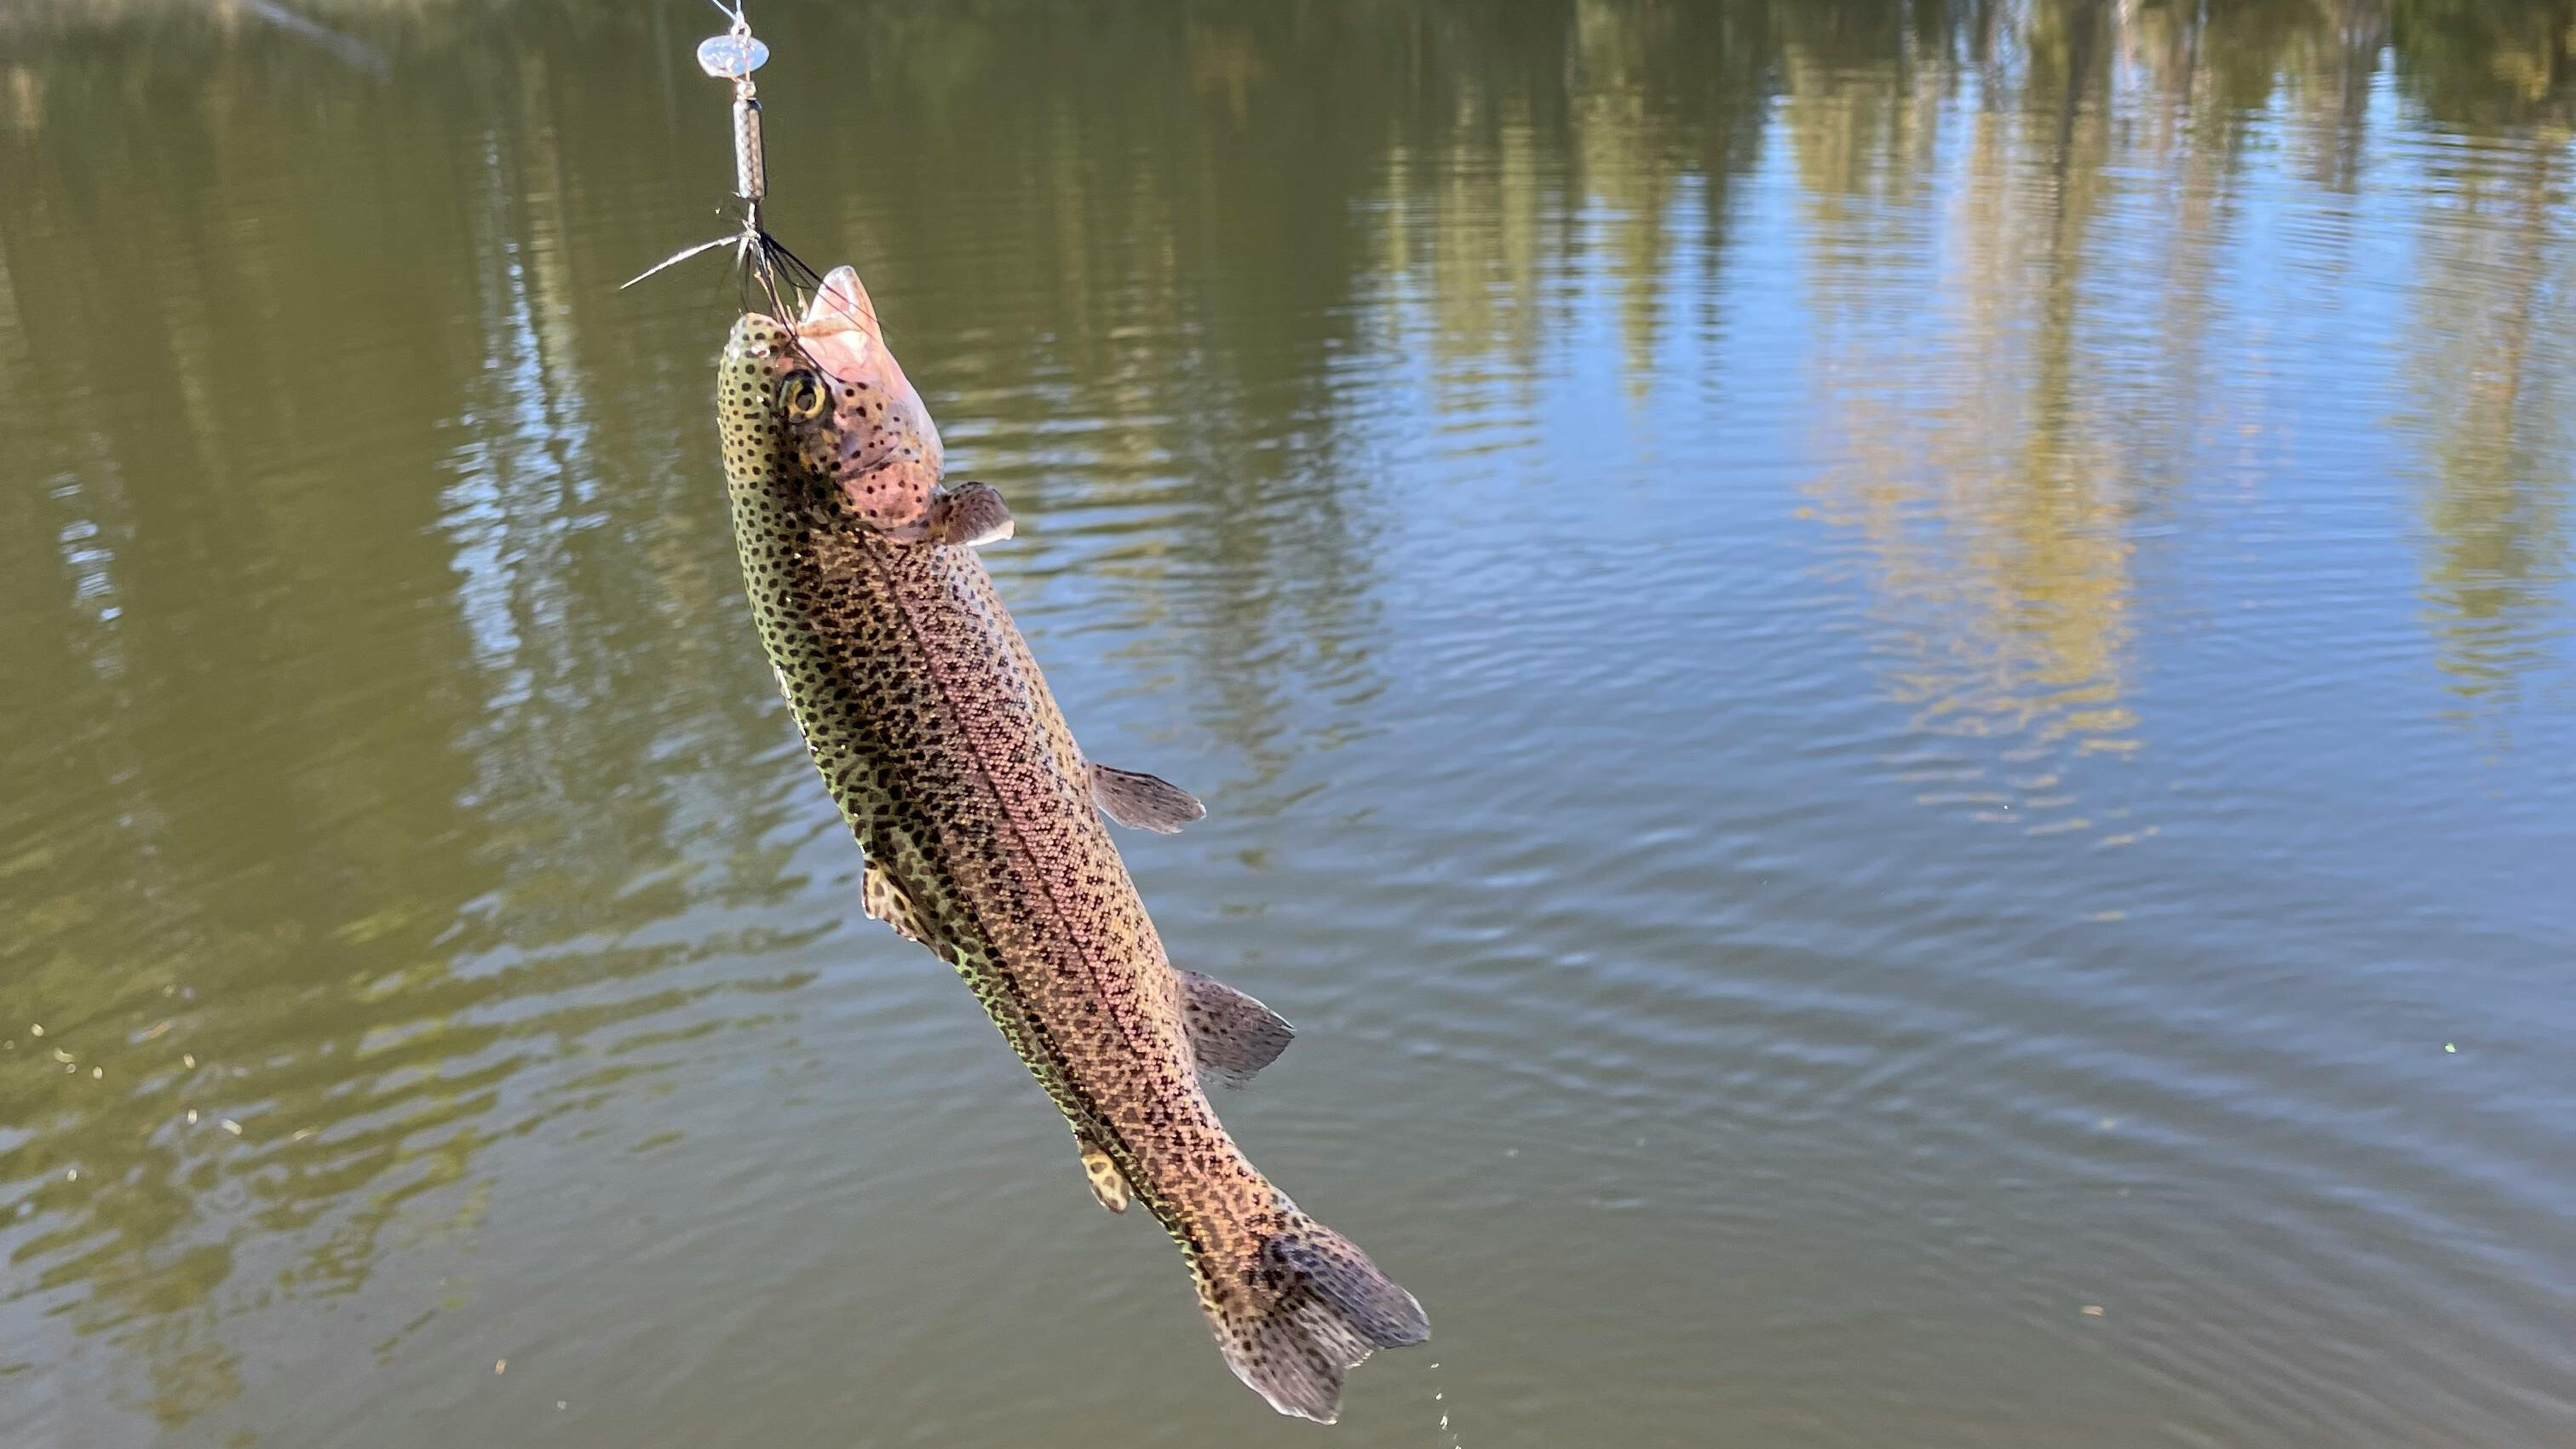 Previously Undetected Parasite Discovered in Wild Wisconsin Trout